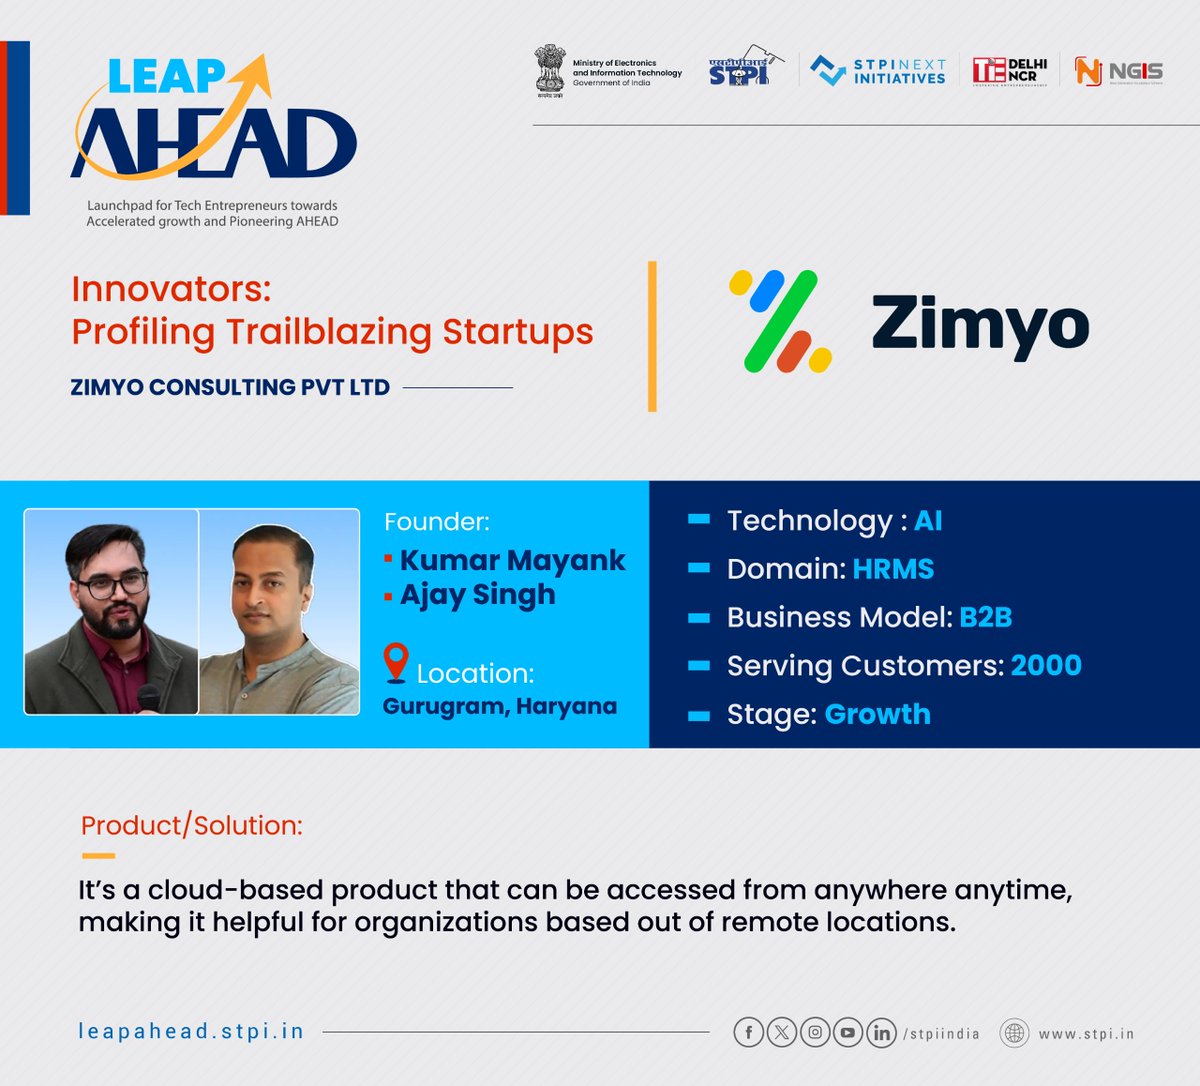 M/s @zimyo_official Pvt Ltd, one of the 75+ selected companies for LEAP AHEAD Cohort, offers comprehensive #HR software that simplifies and automates processes including employee management, payroll, compliance, and performance appraisal.